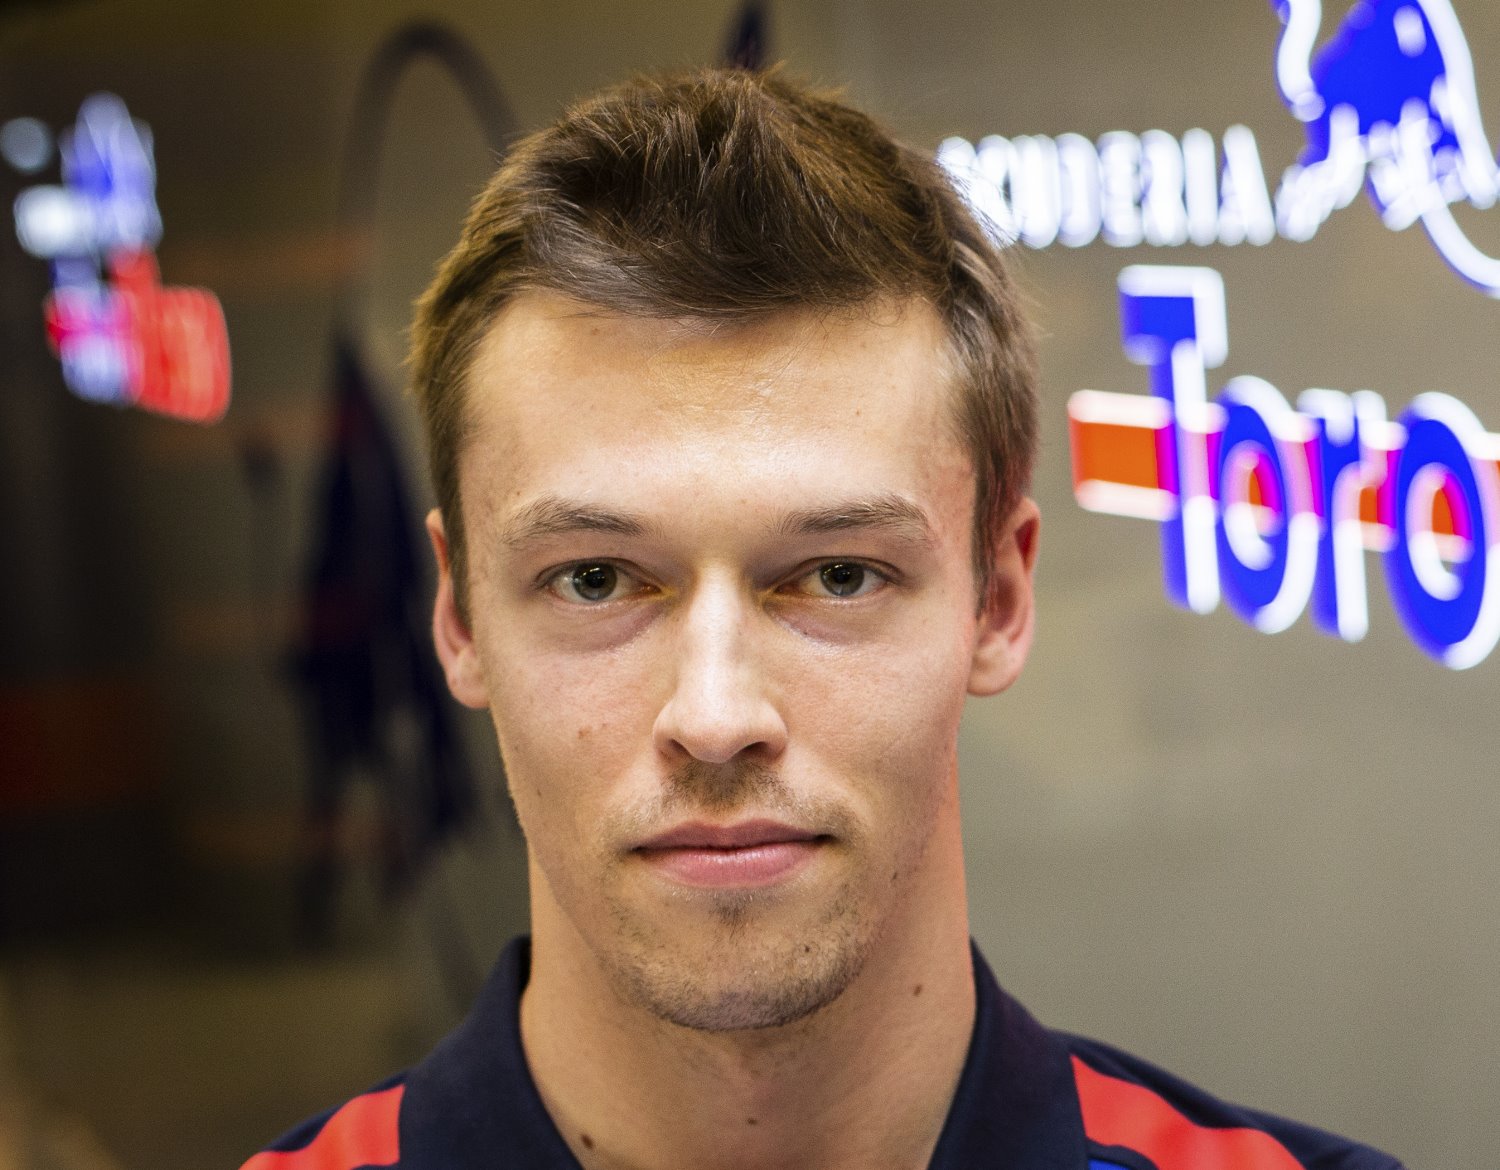 If Daniil Kvyat can bring a really large check, anything is possible